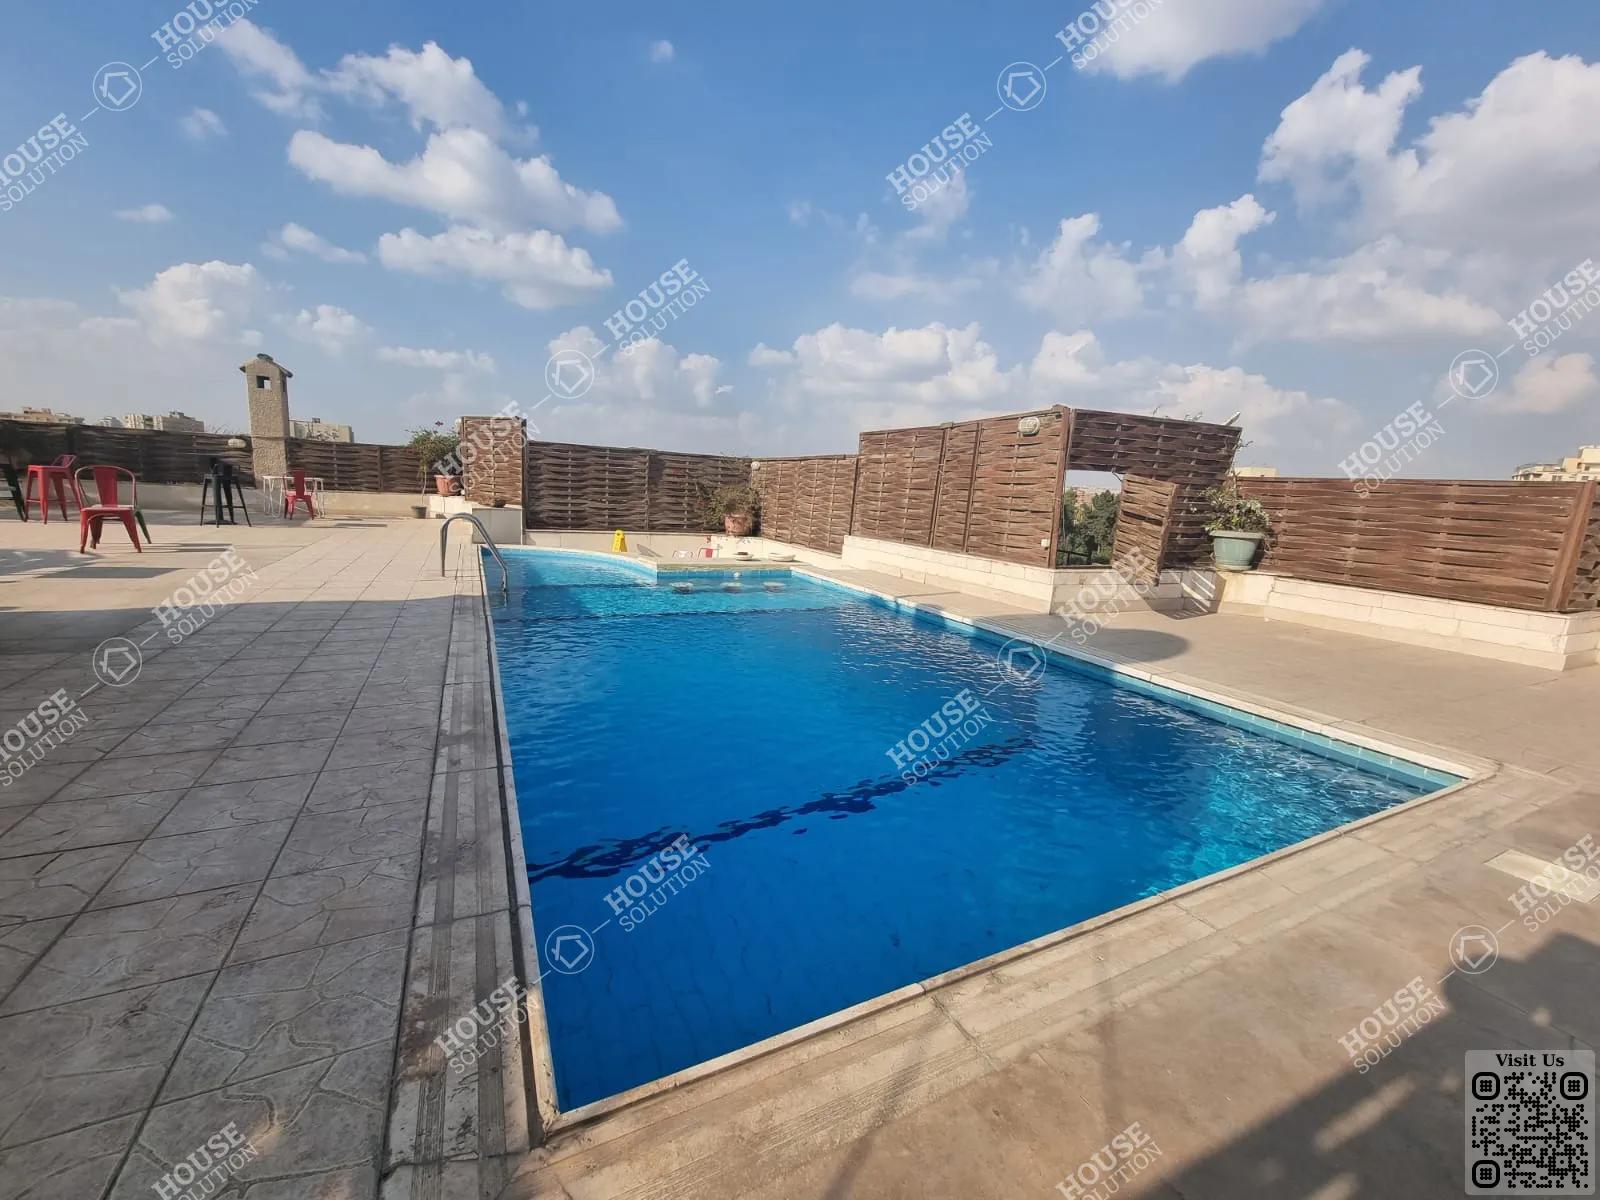 SHARED SWIMMING POOL  @ Ground Floors For Rent In Maadi Maadi Sarayat Area: 150 m² consists of 2 Bedrooms 2 Bathrooms Furnished 5 stars #5616-2